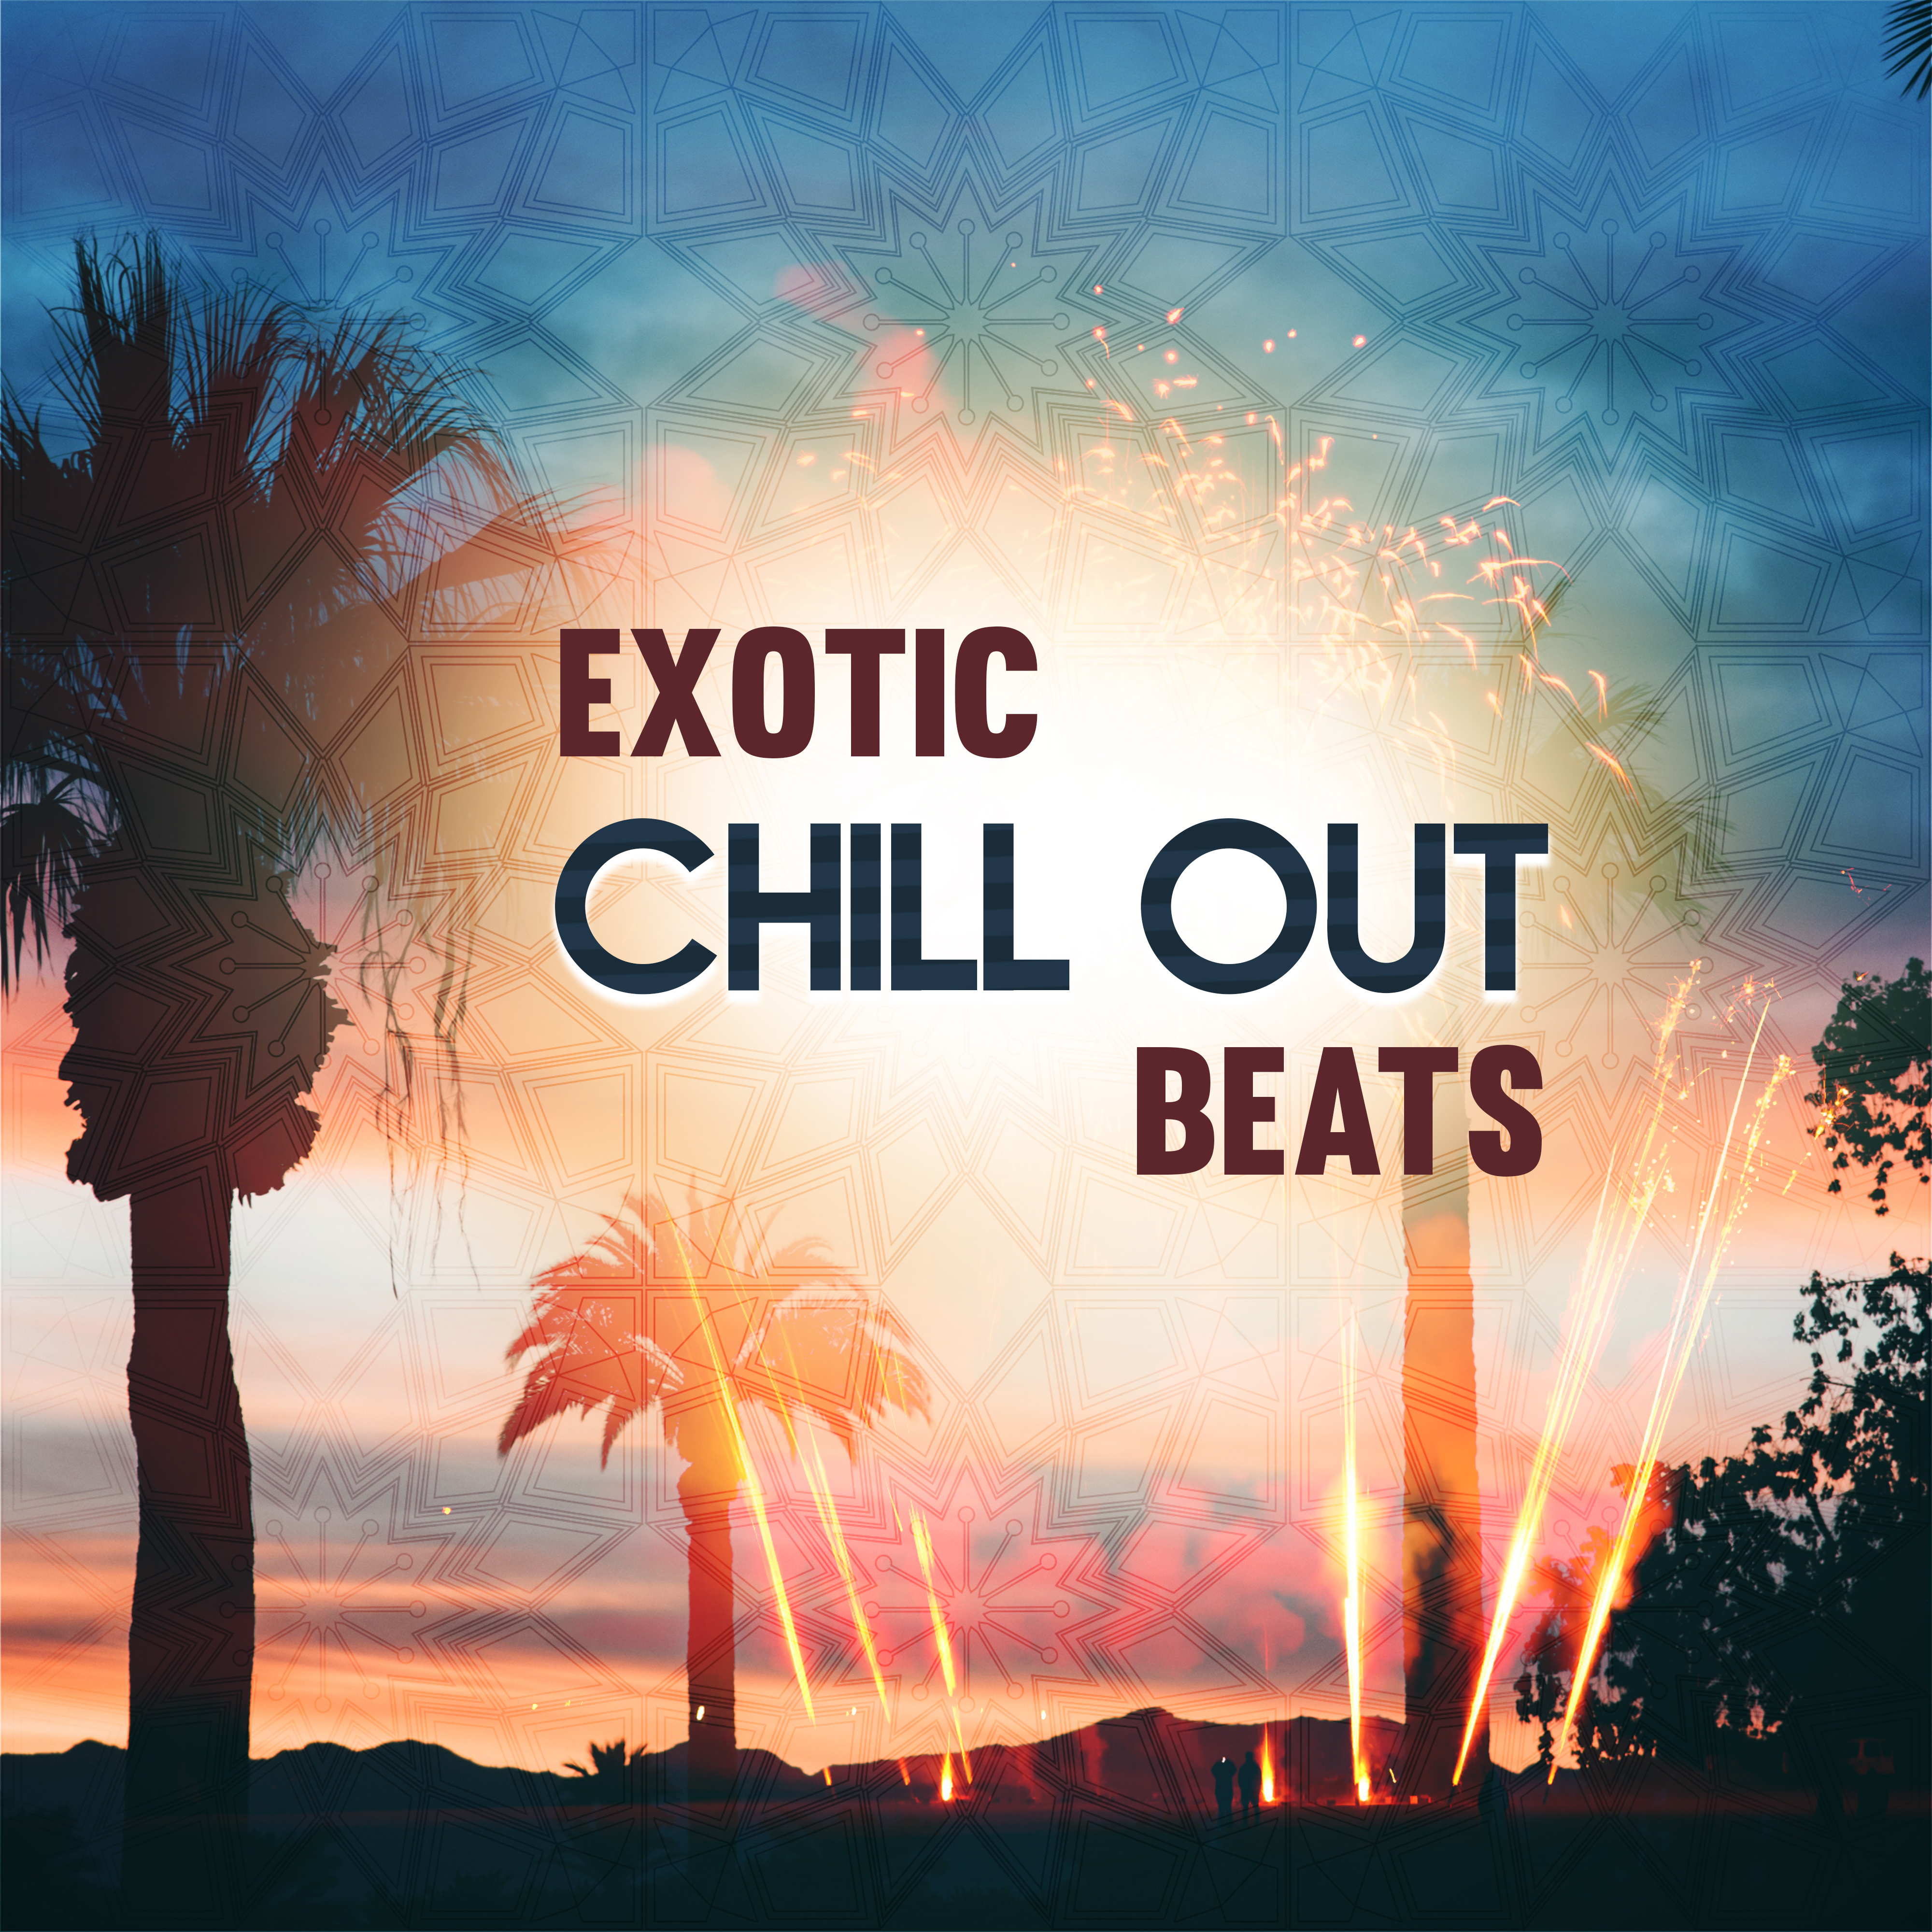 Exotic Chill Out Beats – Tropical Melodies to Calm Down, Holiday Relaxation, Sunny Chill Out Music